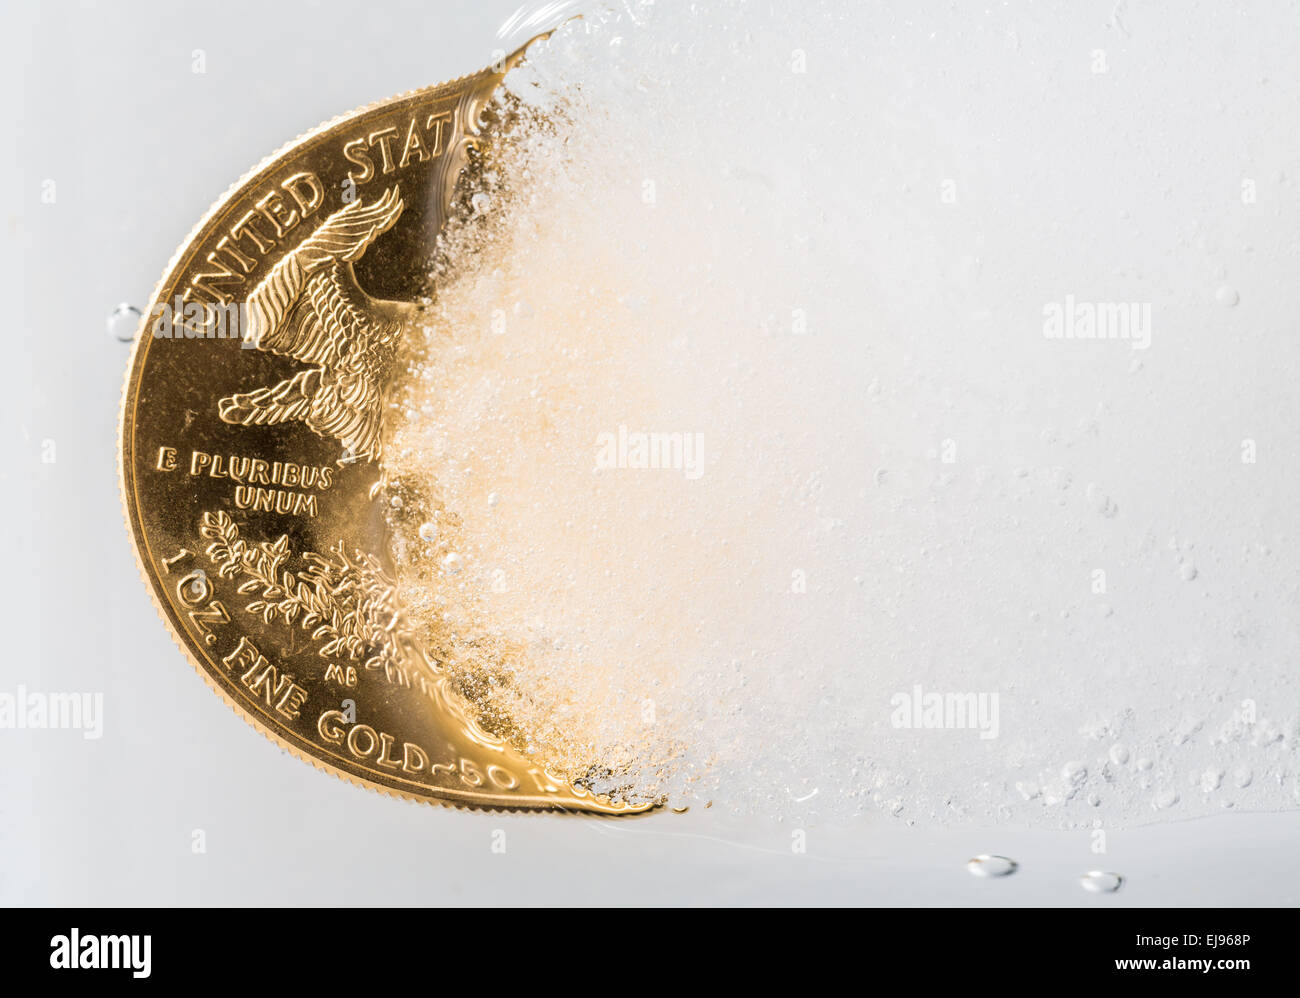 Golden Eagle coin emerging from deep freeze Stock Photo